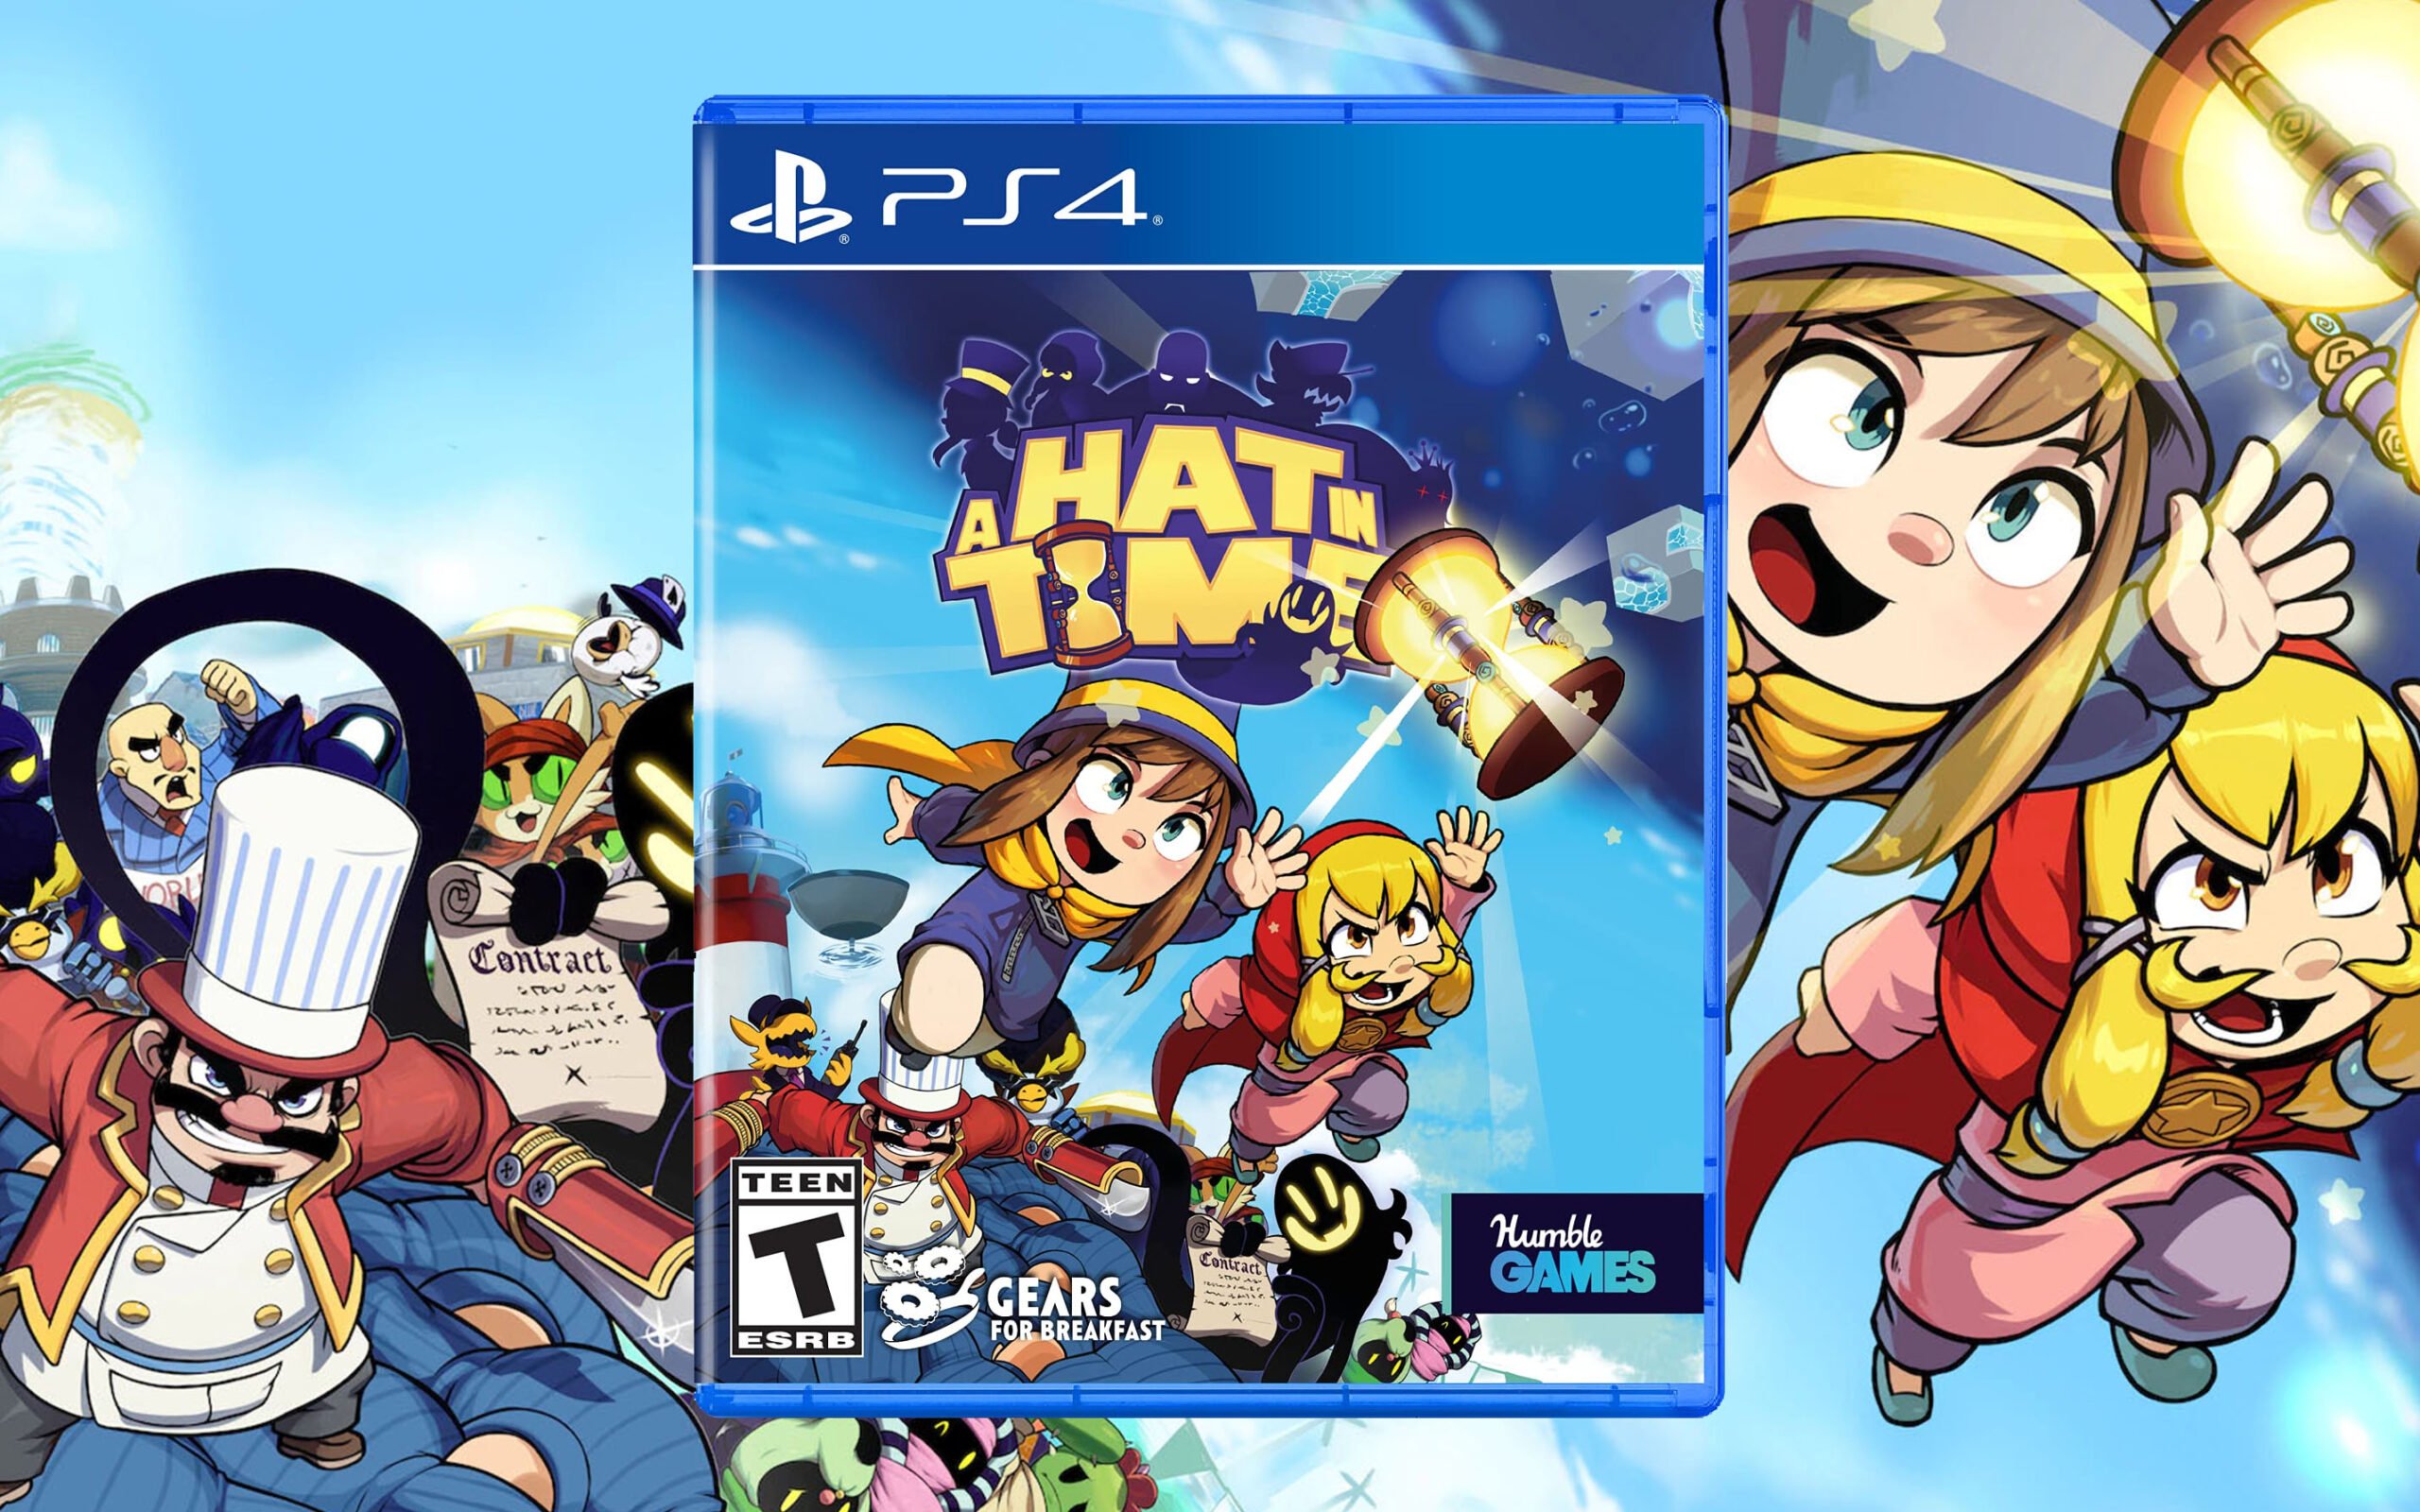 A Hat in Time, Nintendo